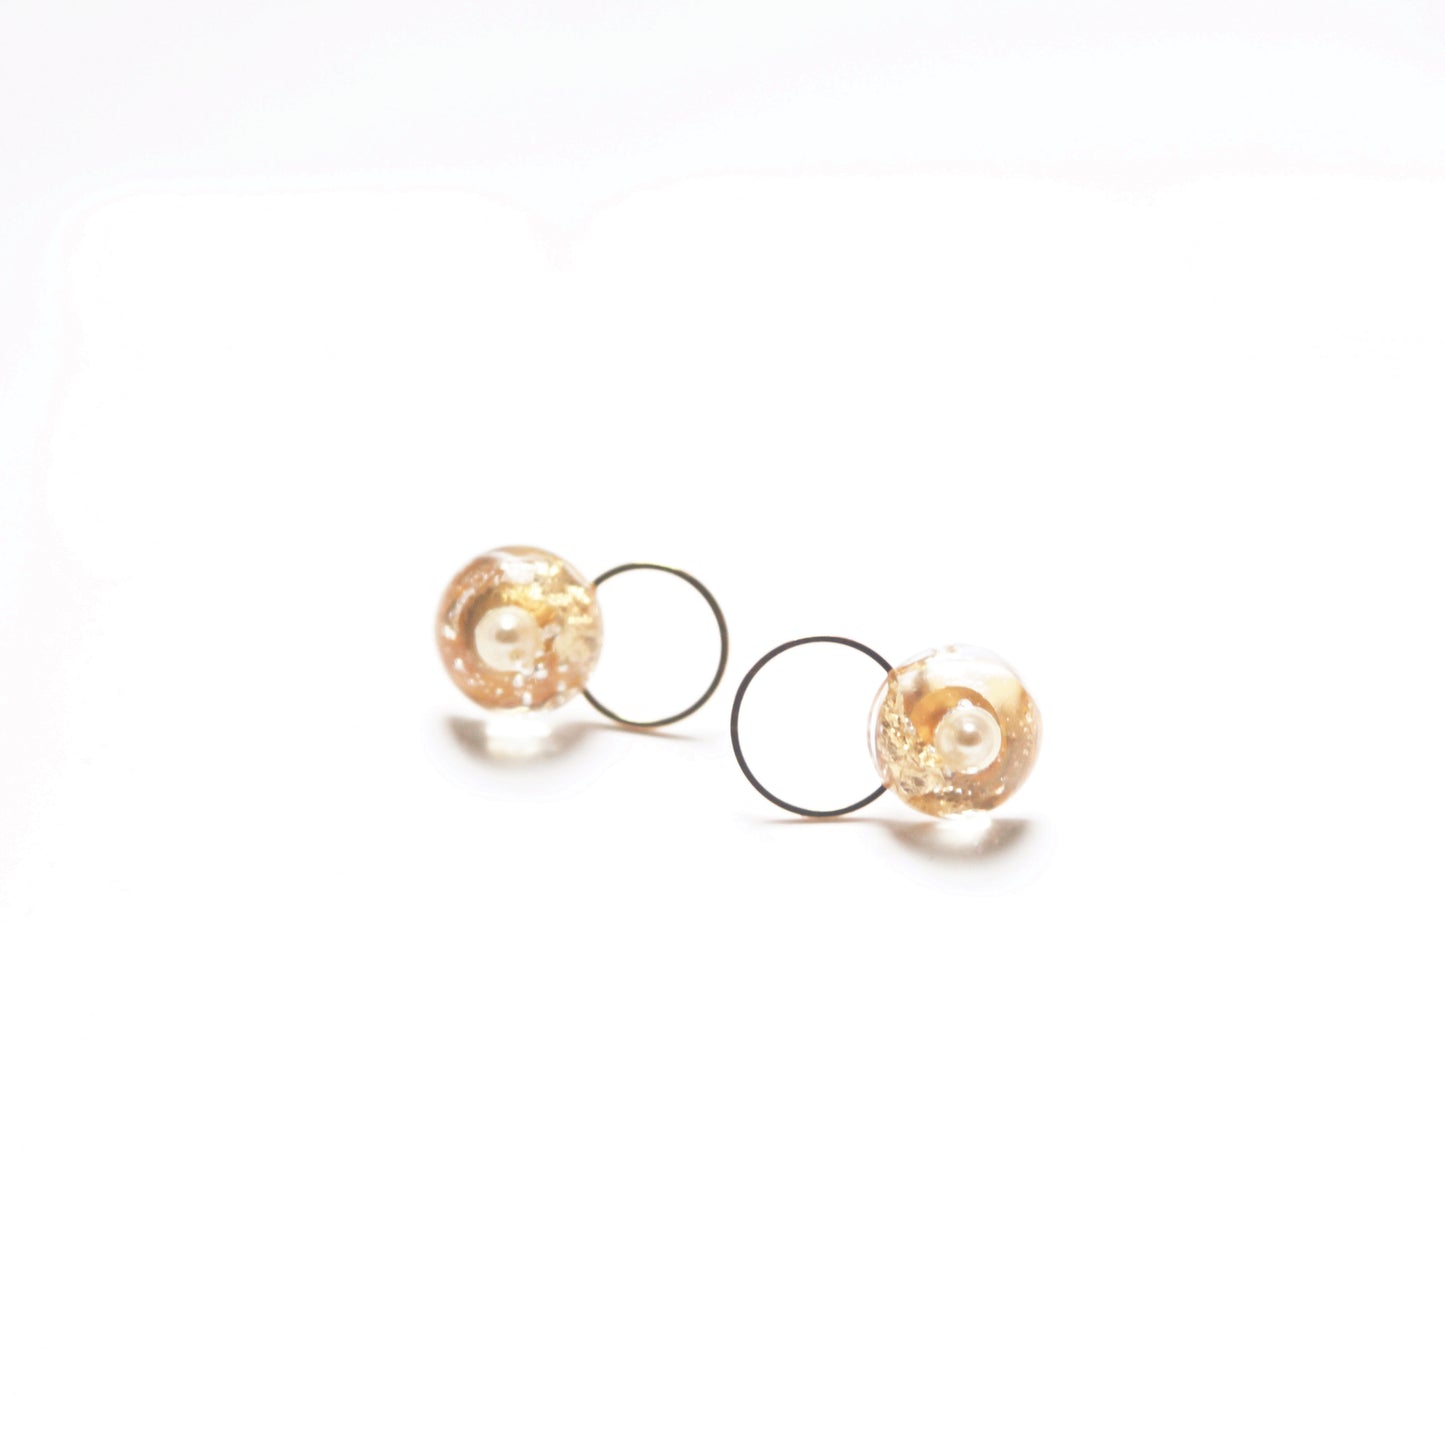 Golden hoop earrings with Circle Art resin design, adorned with a delicate freshwater Pearl and golden leaf accent